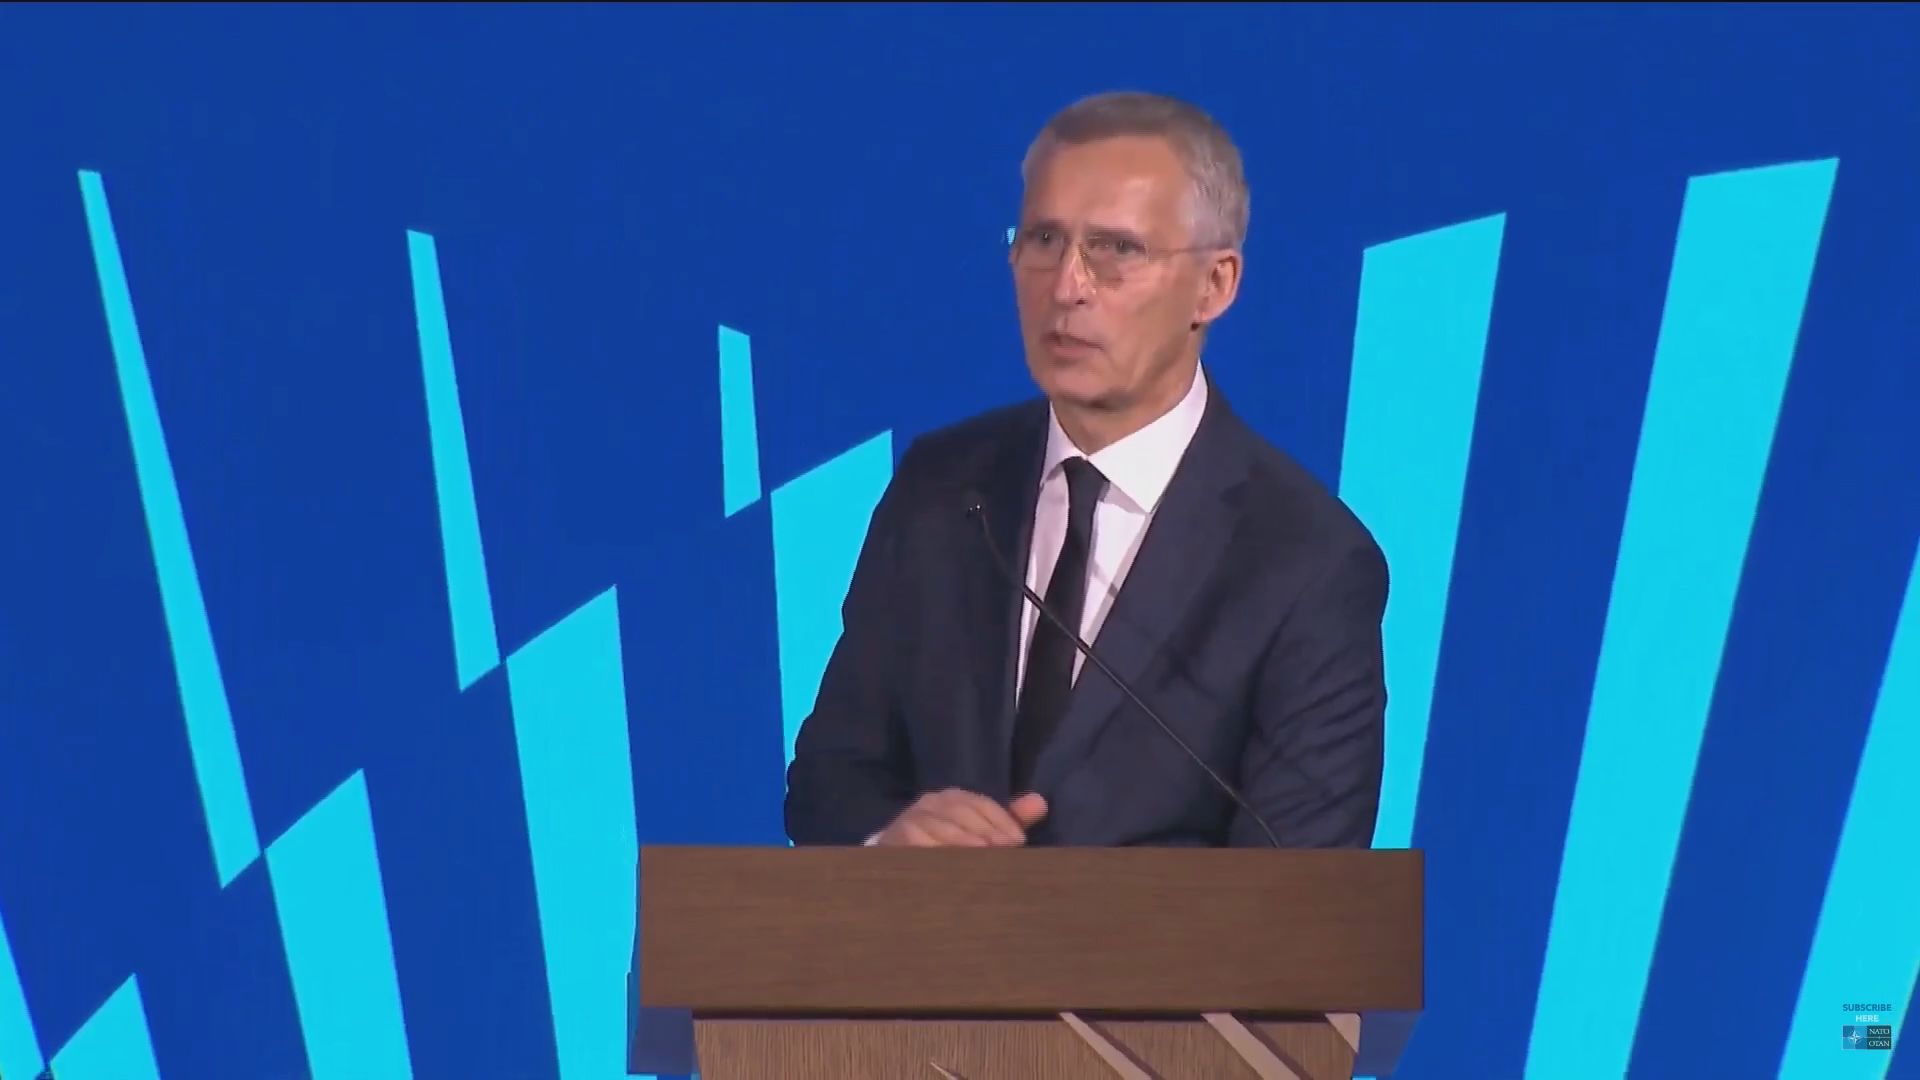 NATO Secretary General Outlines New Defense Industry Agreement, Urges Countries to Contribute to NATO’s Defense Budget